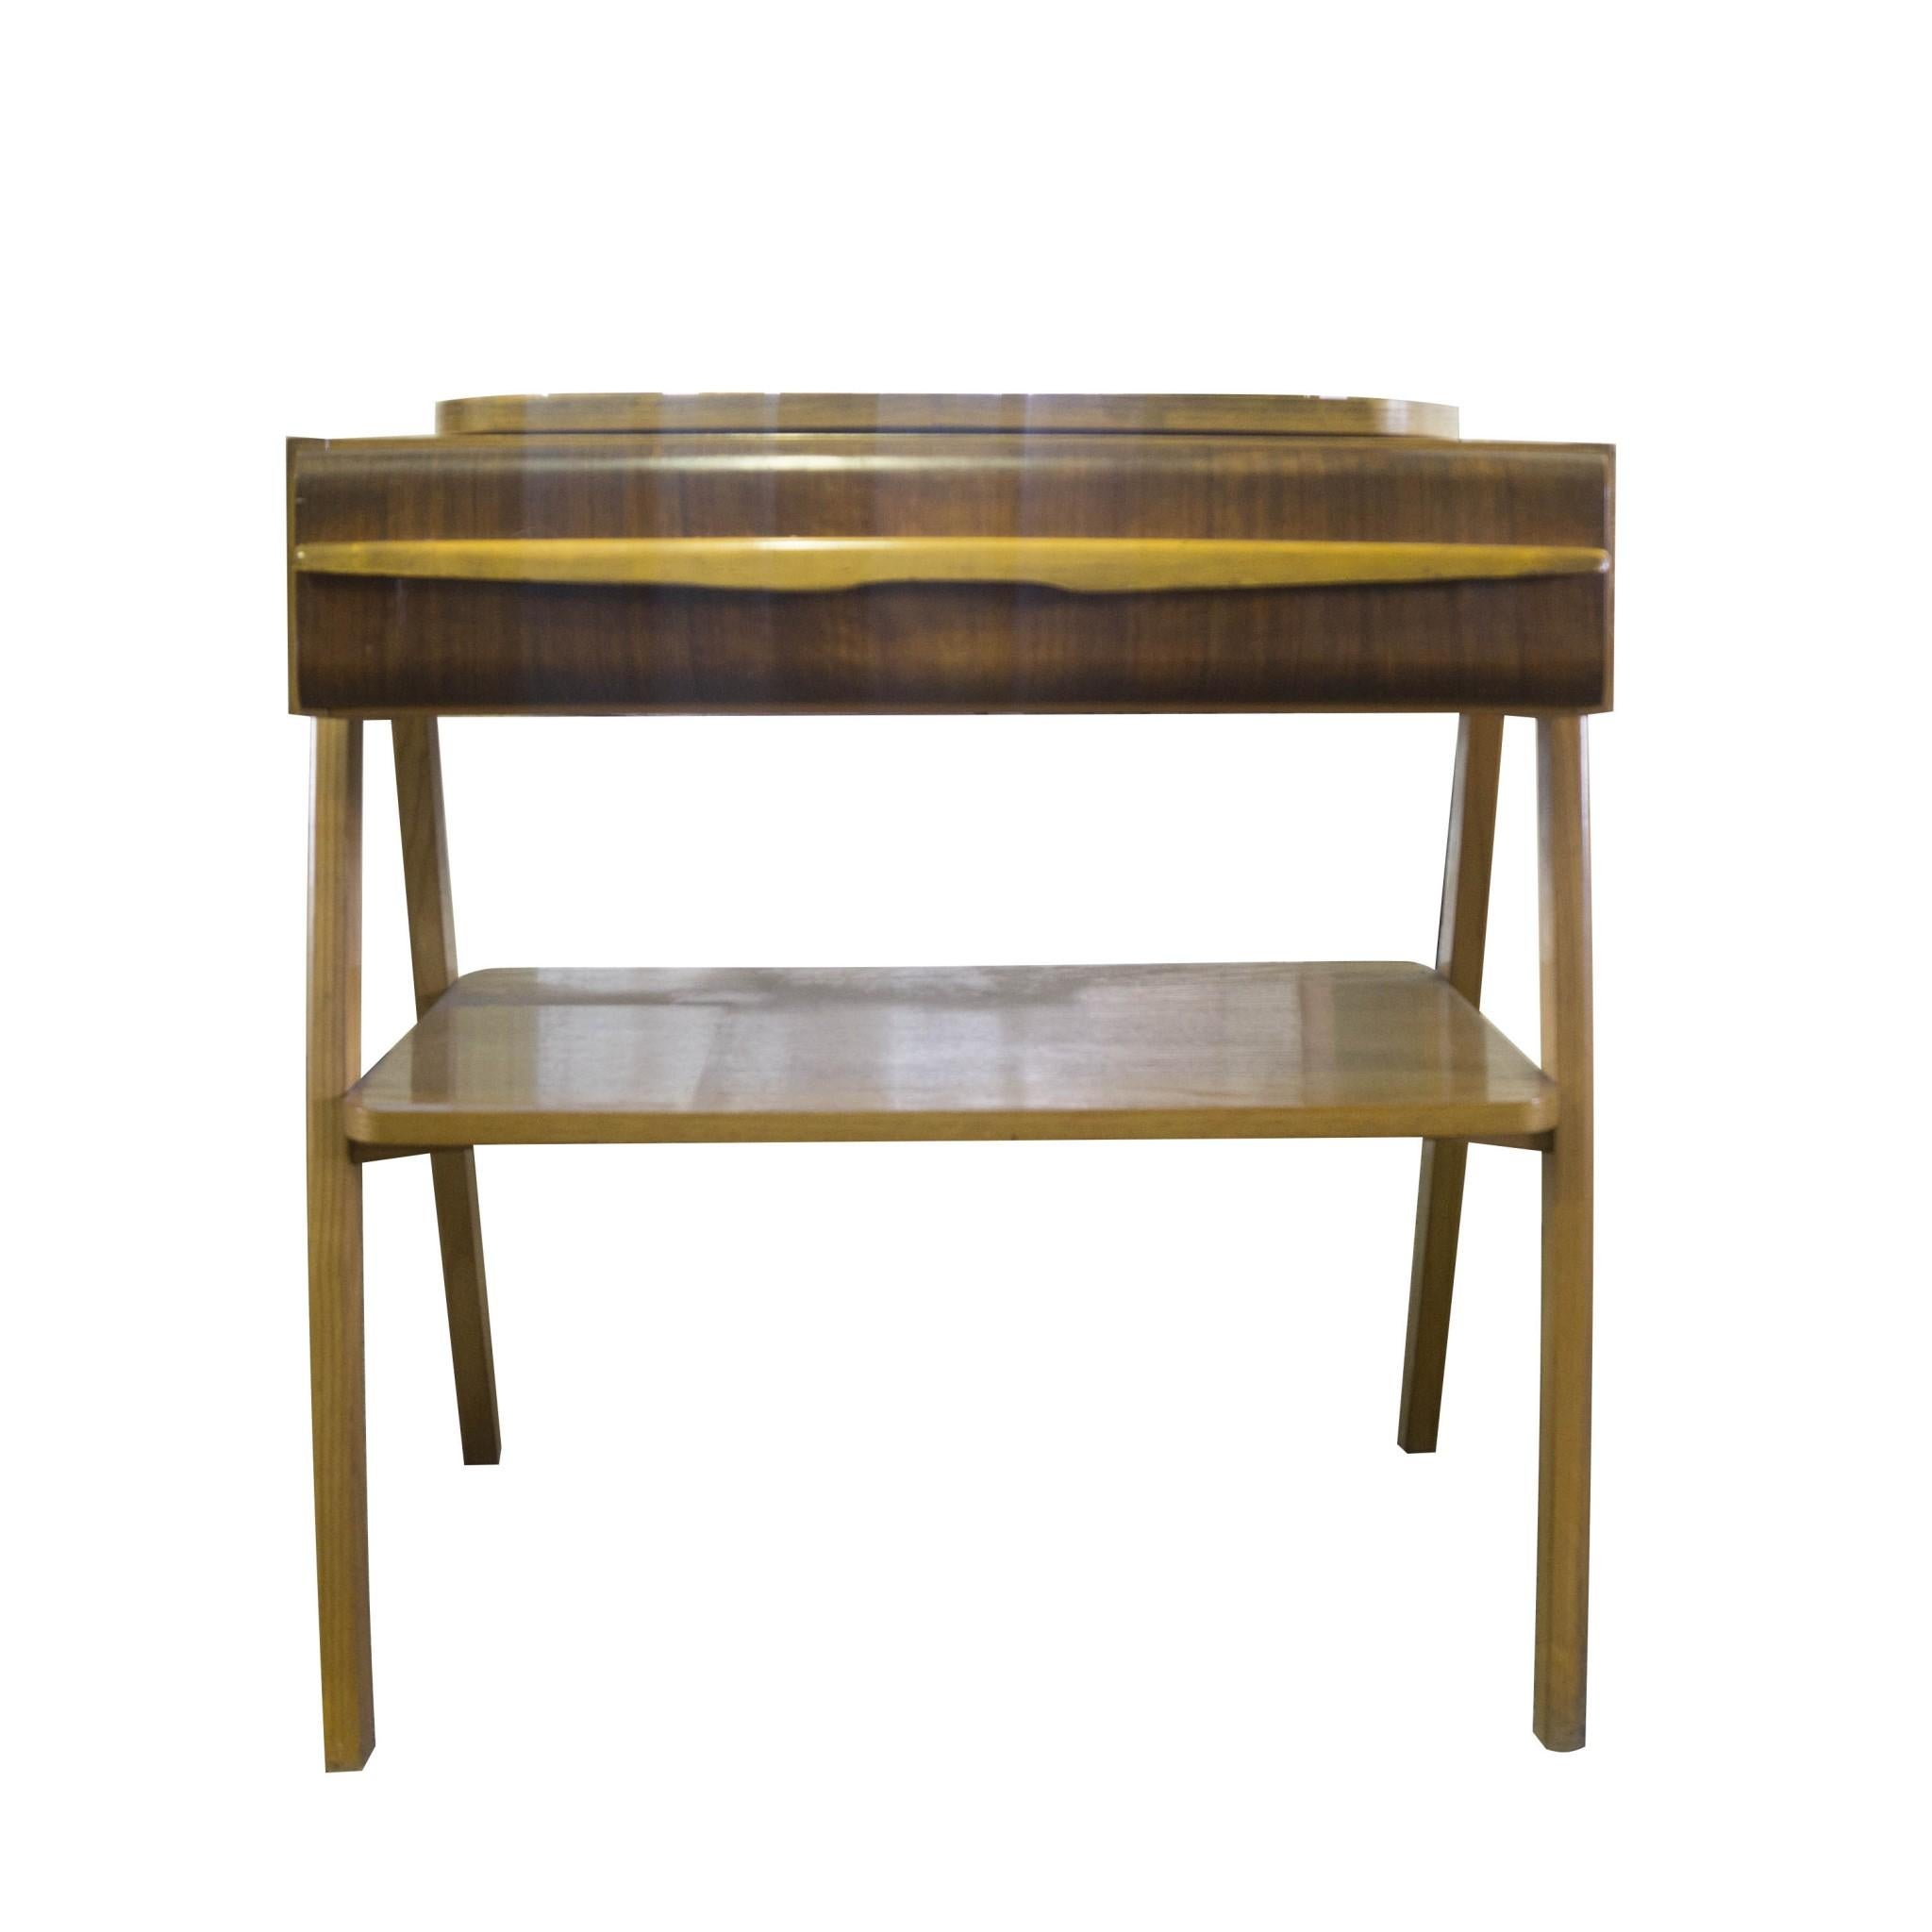 Interesting midcentury positioning side table, solid oak, drawer-walnut veneer, associated with world-renowned EXPO 58 exhibition in Brussels. Combination oak and walnut wood. In good Vintage condition.

  